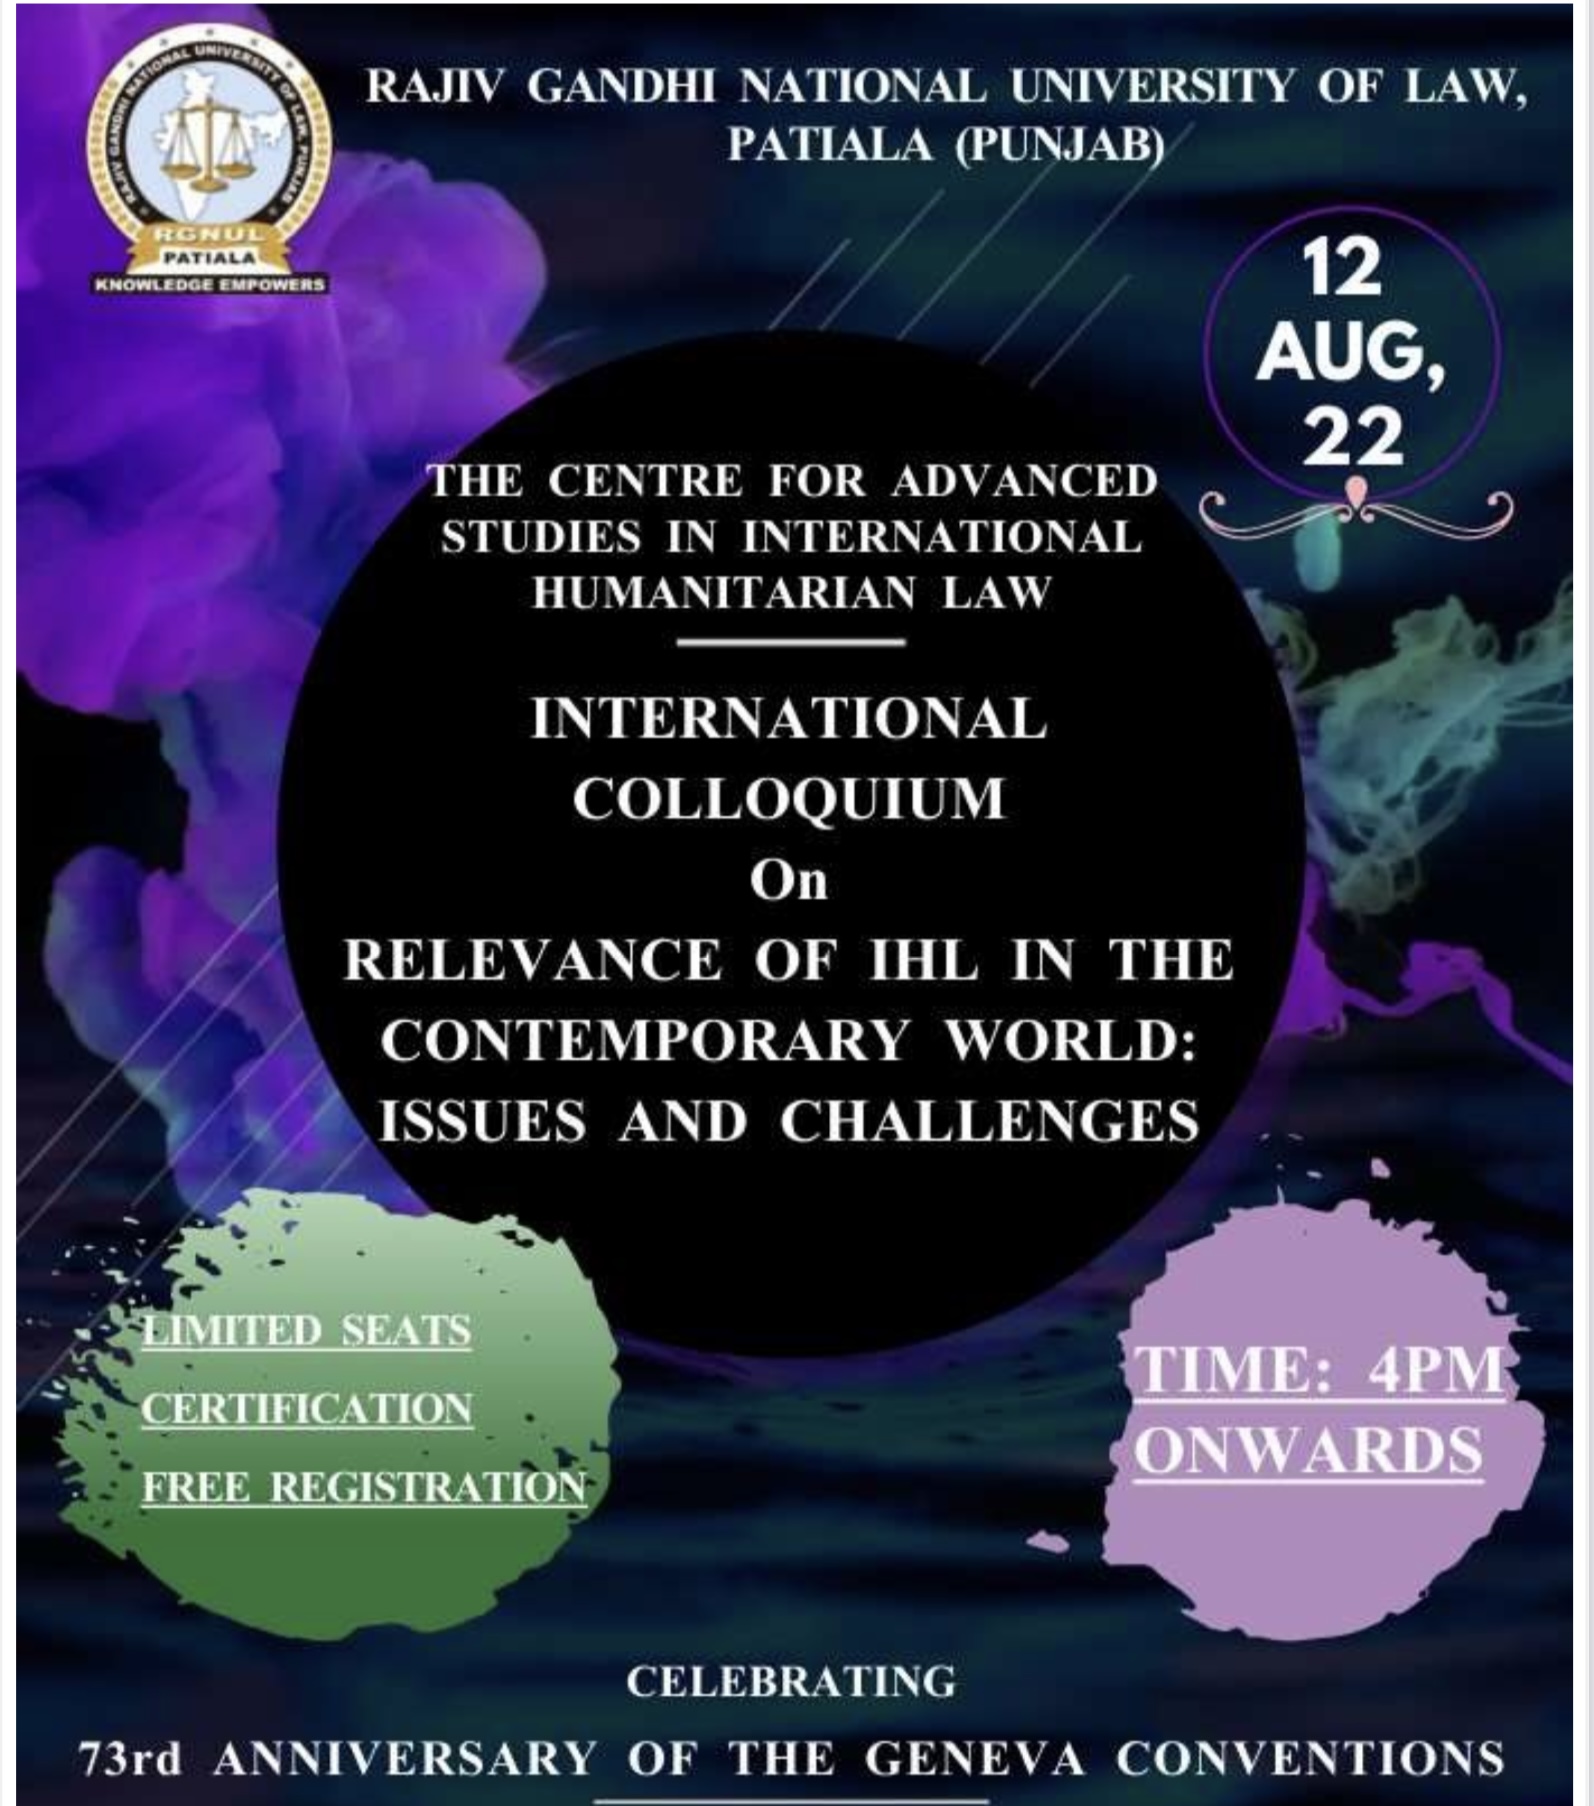 International colloquium on relevance of IHL in the contemporary world by RGNL ,Patiala : August 12